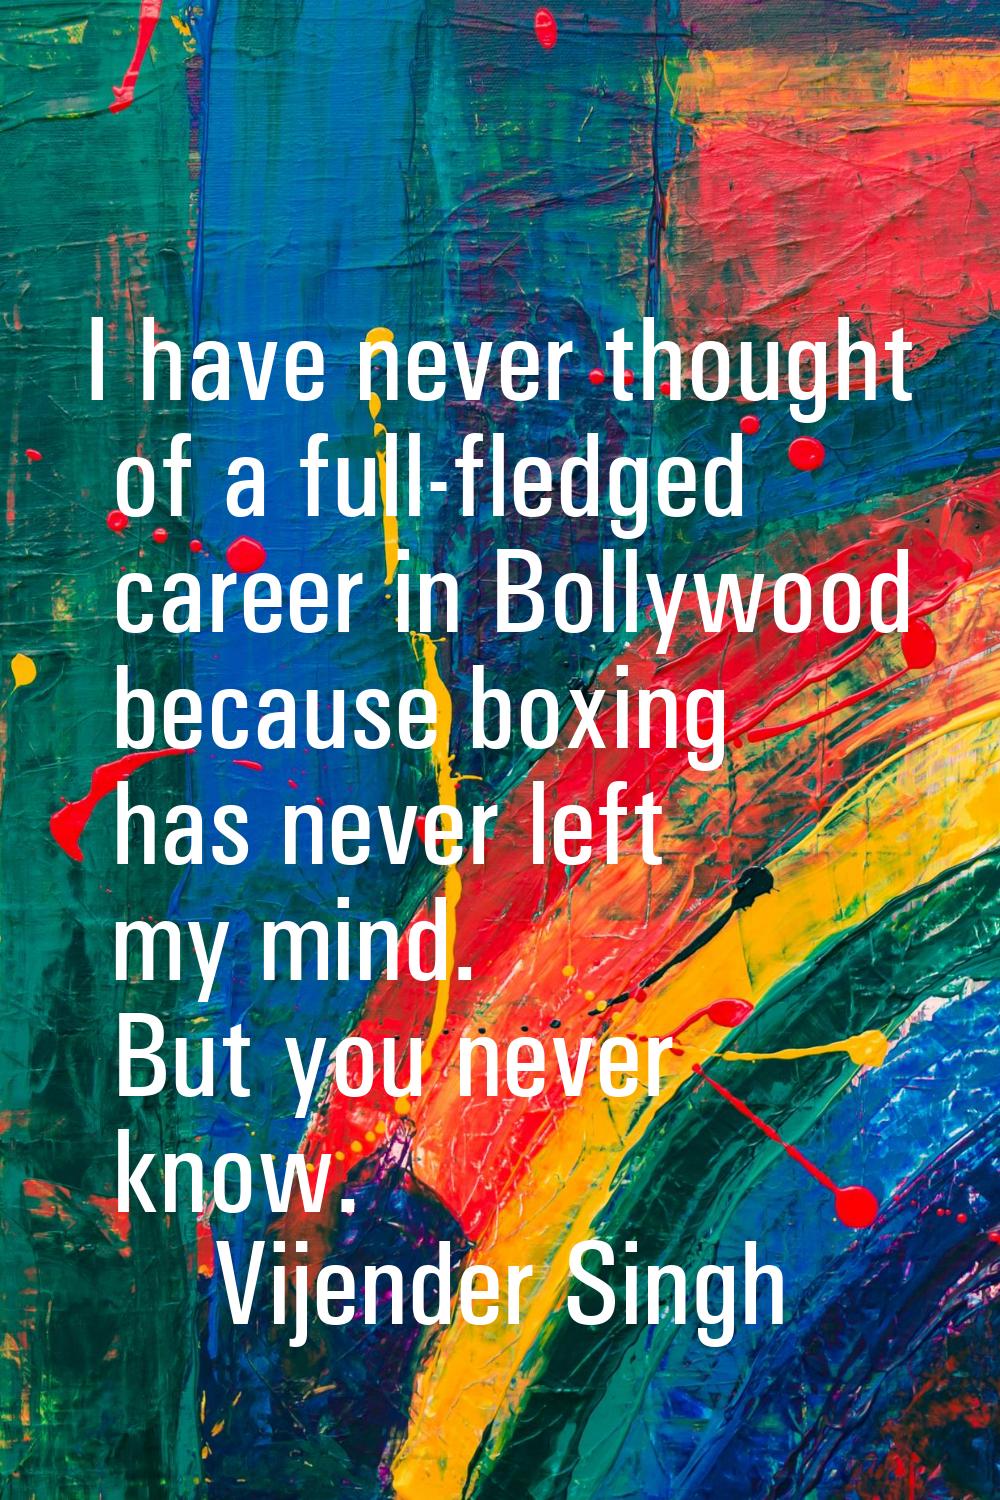 I have never thought of a full-fledged career in Bollywood because boxing has never left my mind. B